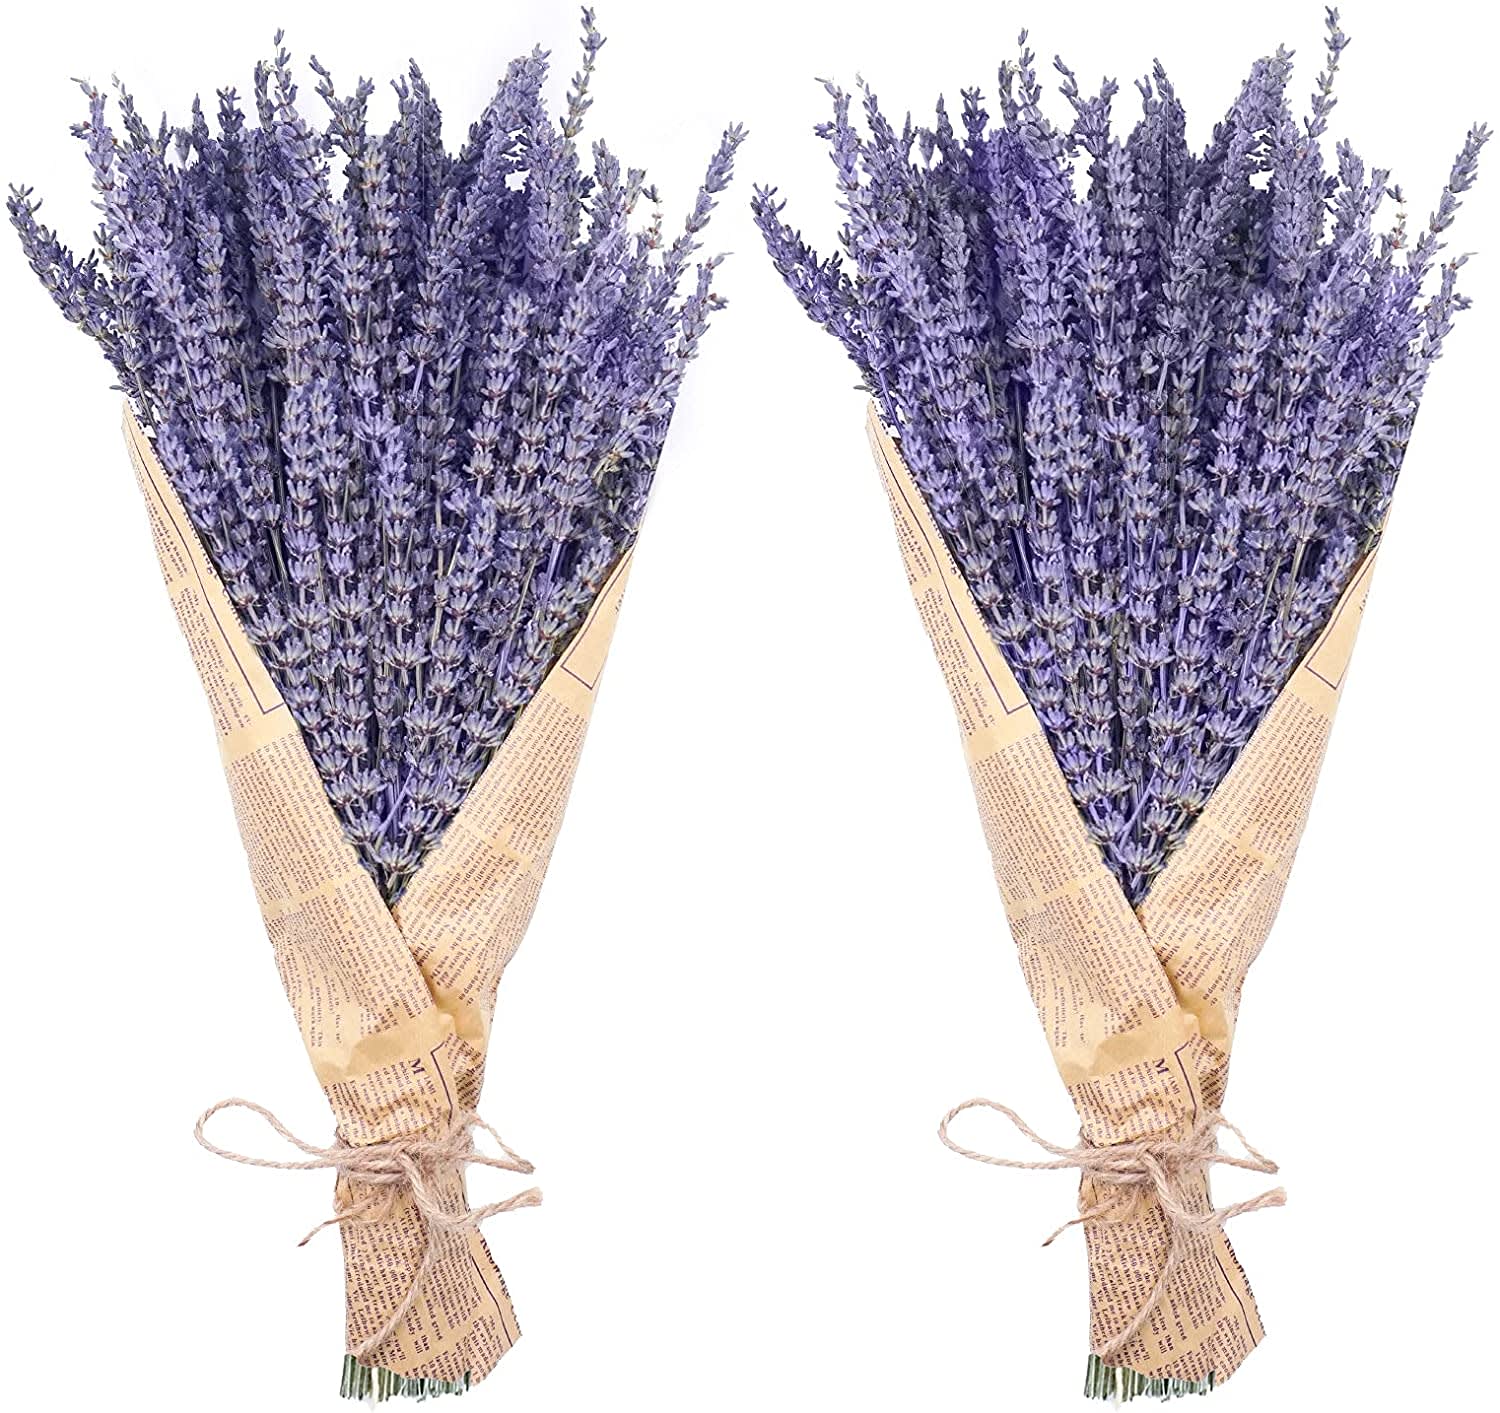 Dried lavender bundle -local pickup only